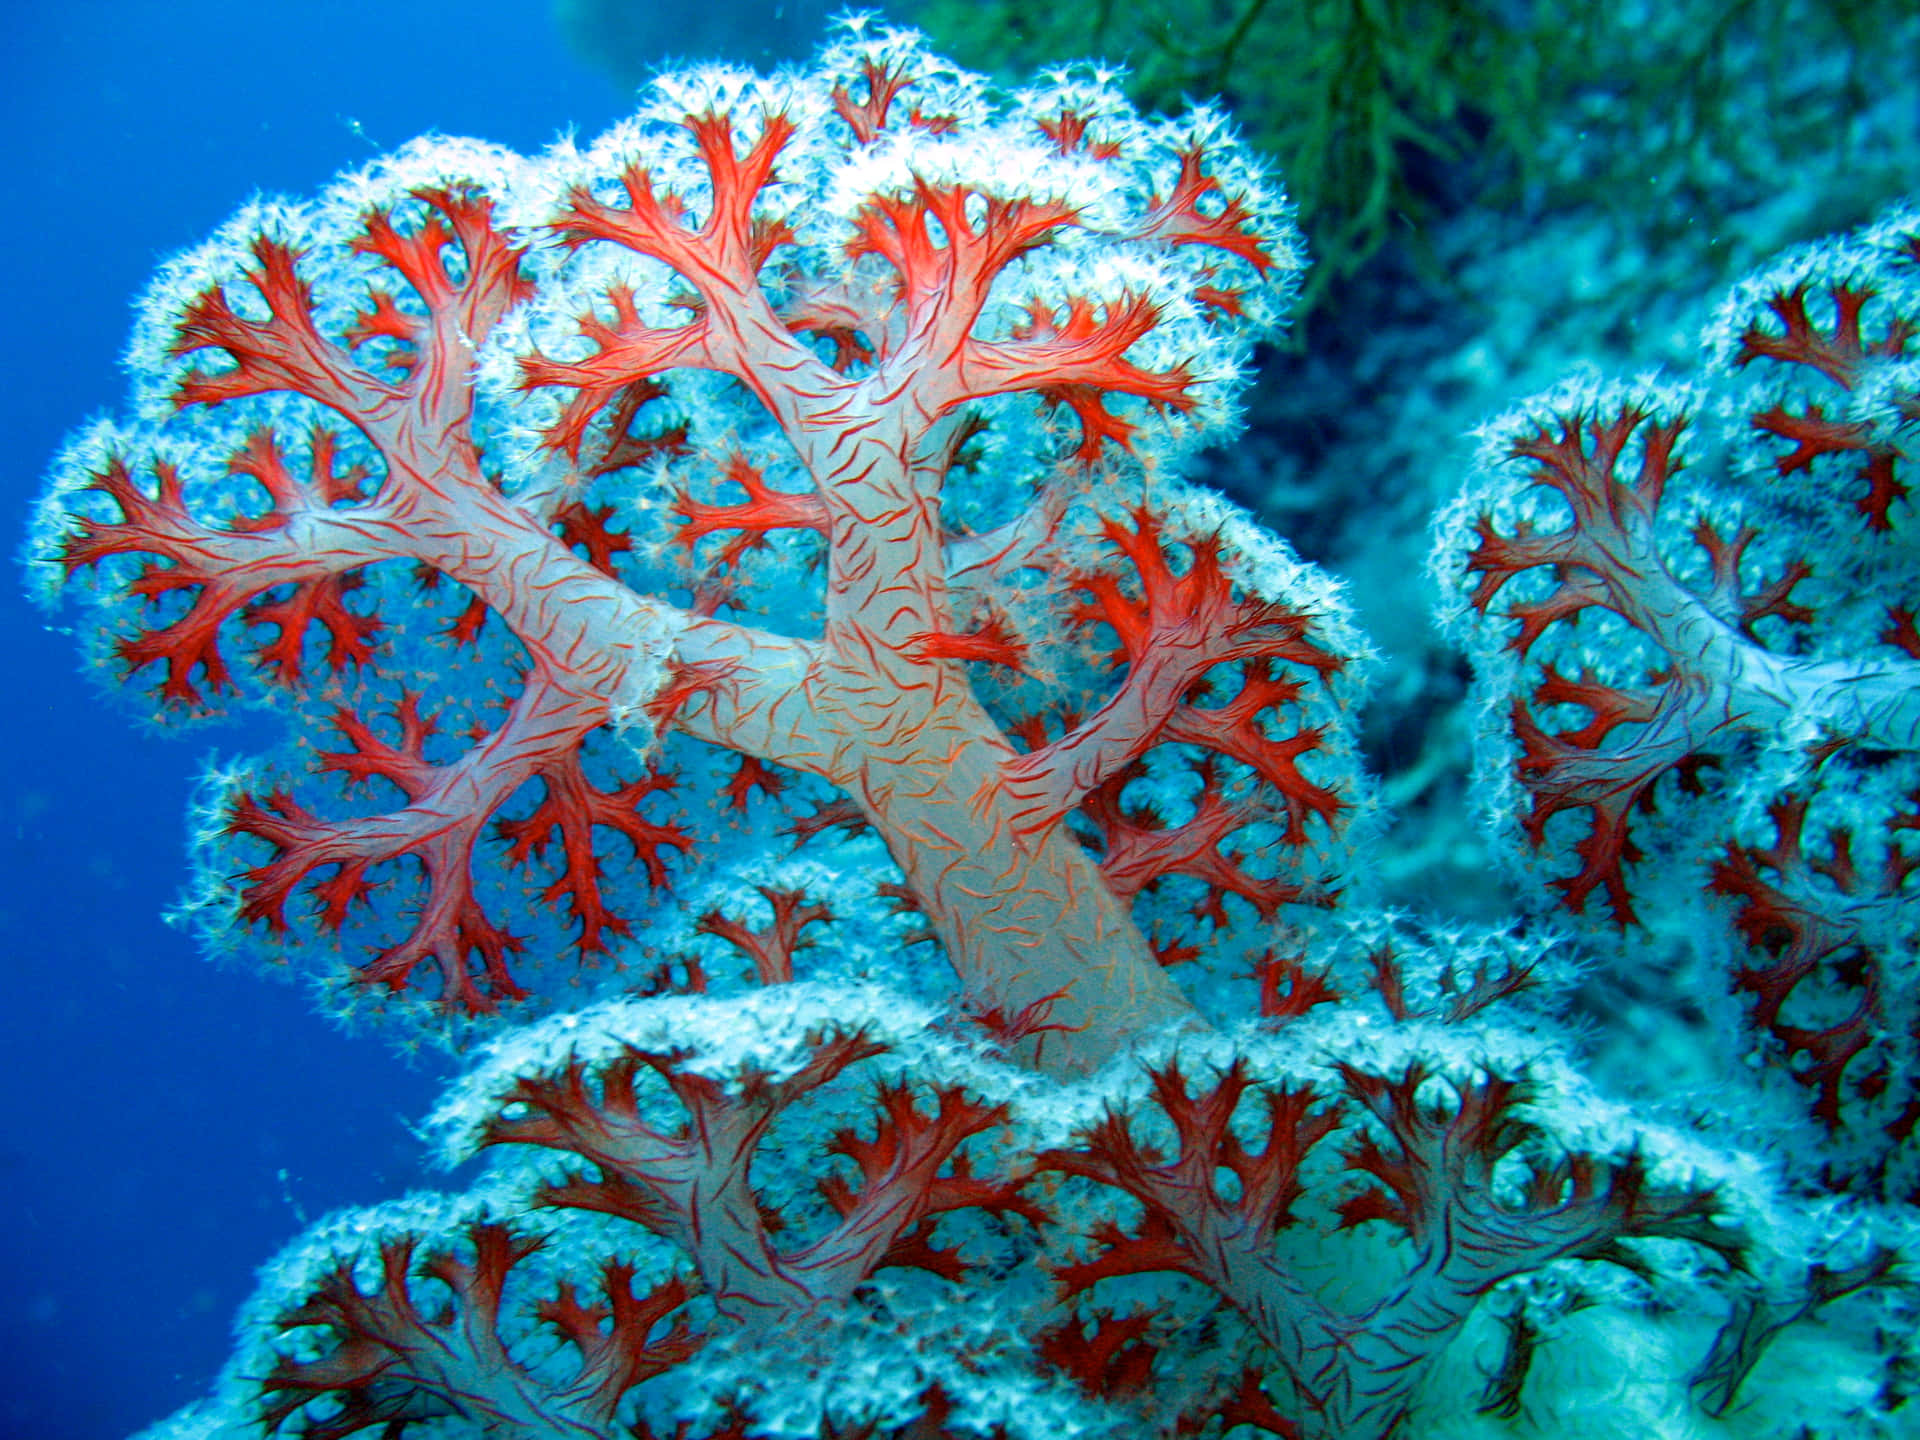 A Coral With Red And White Corals